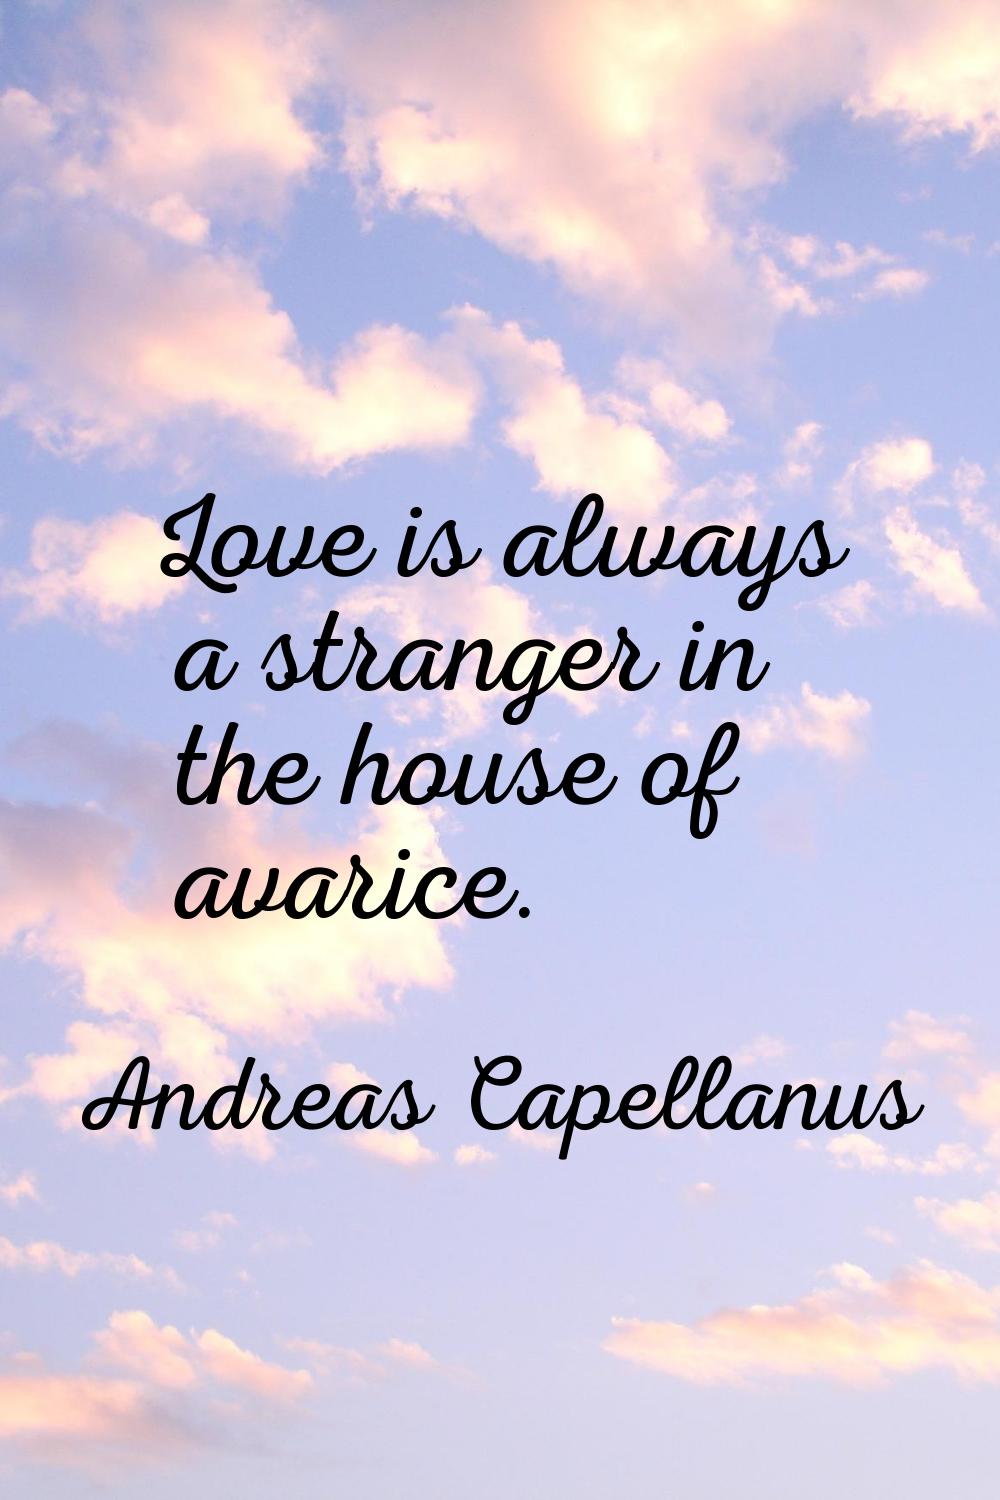 Love is always a stranger in the house of avarice.